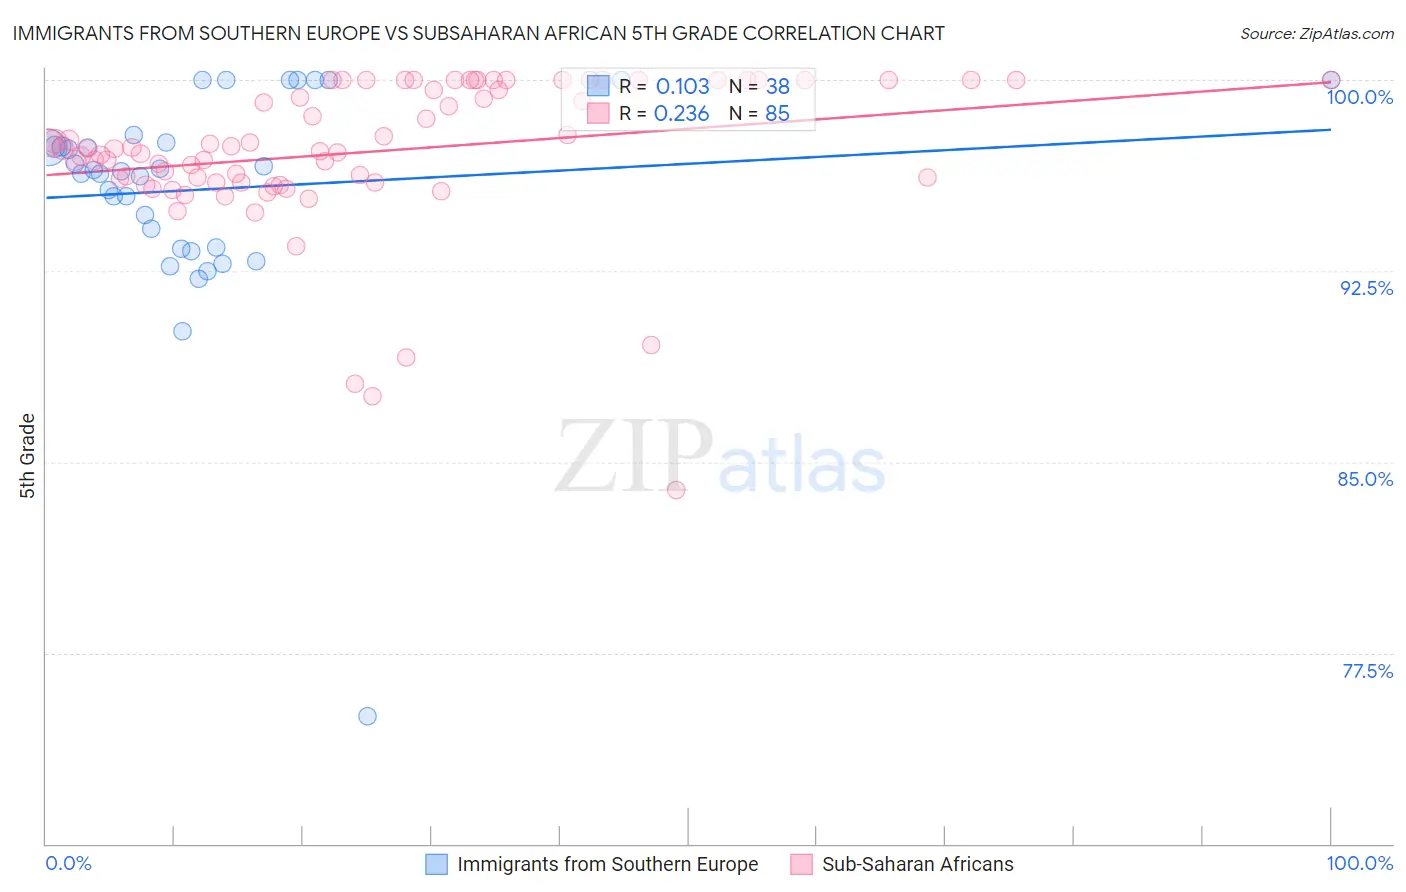 Immigrants from Southern Europe vs Subsaharan African 5th Grade